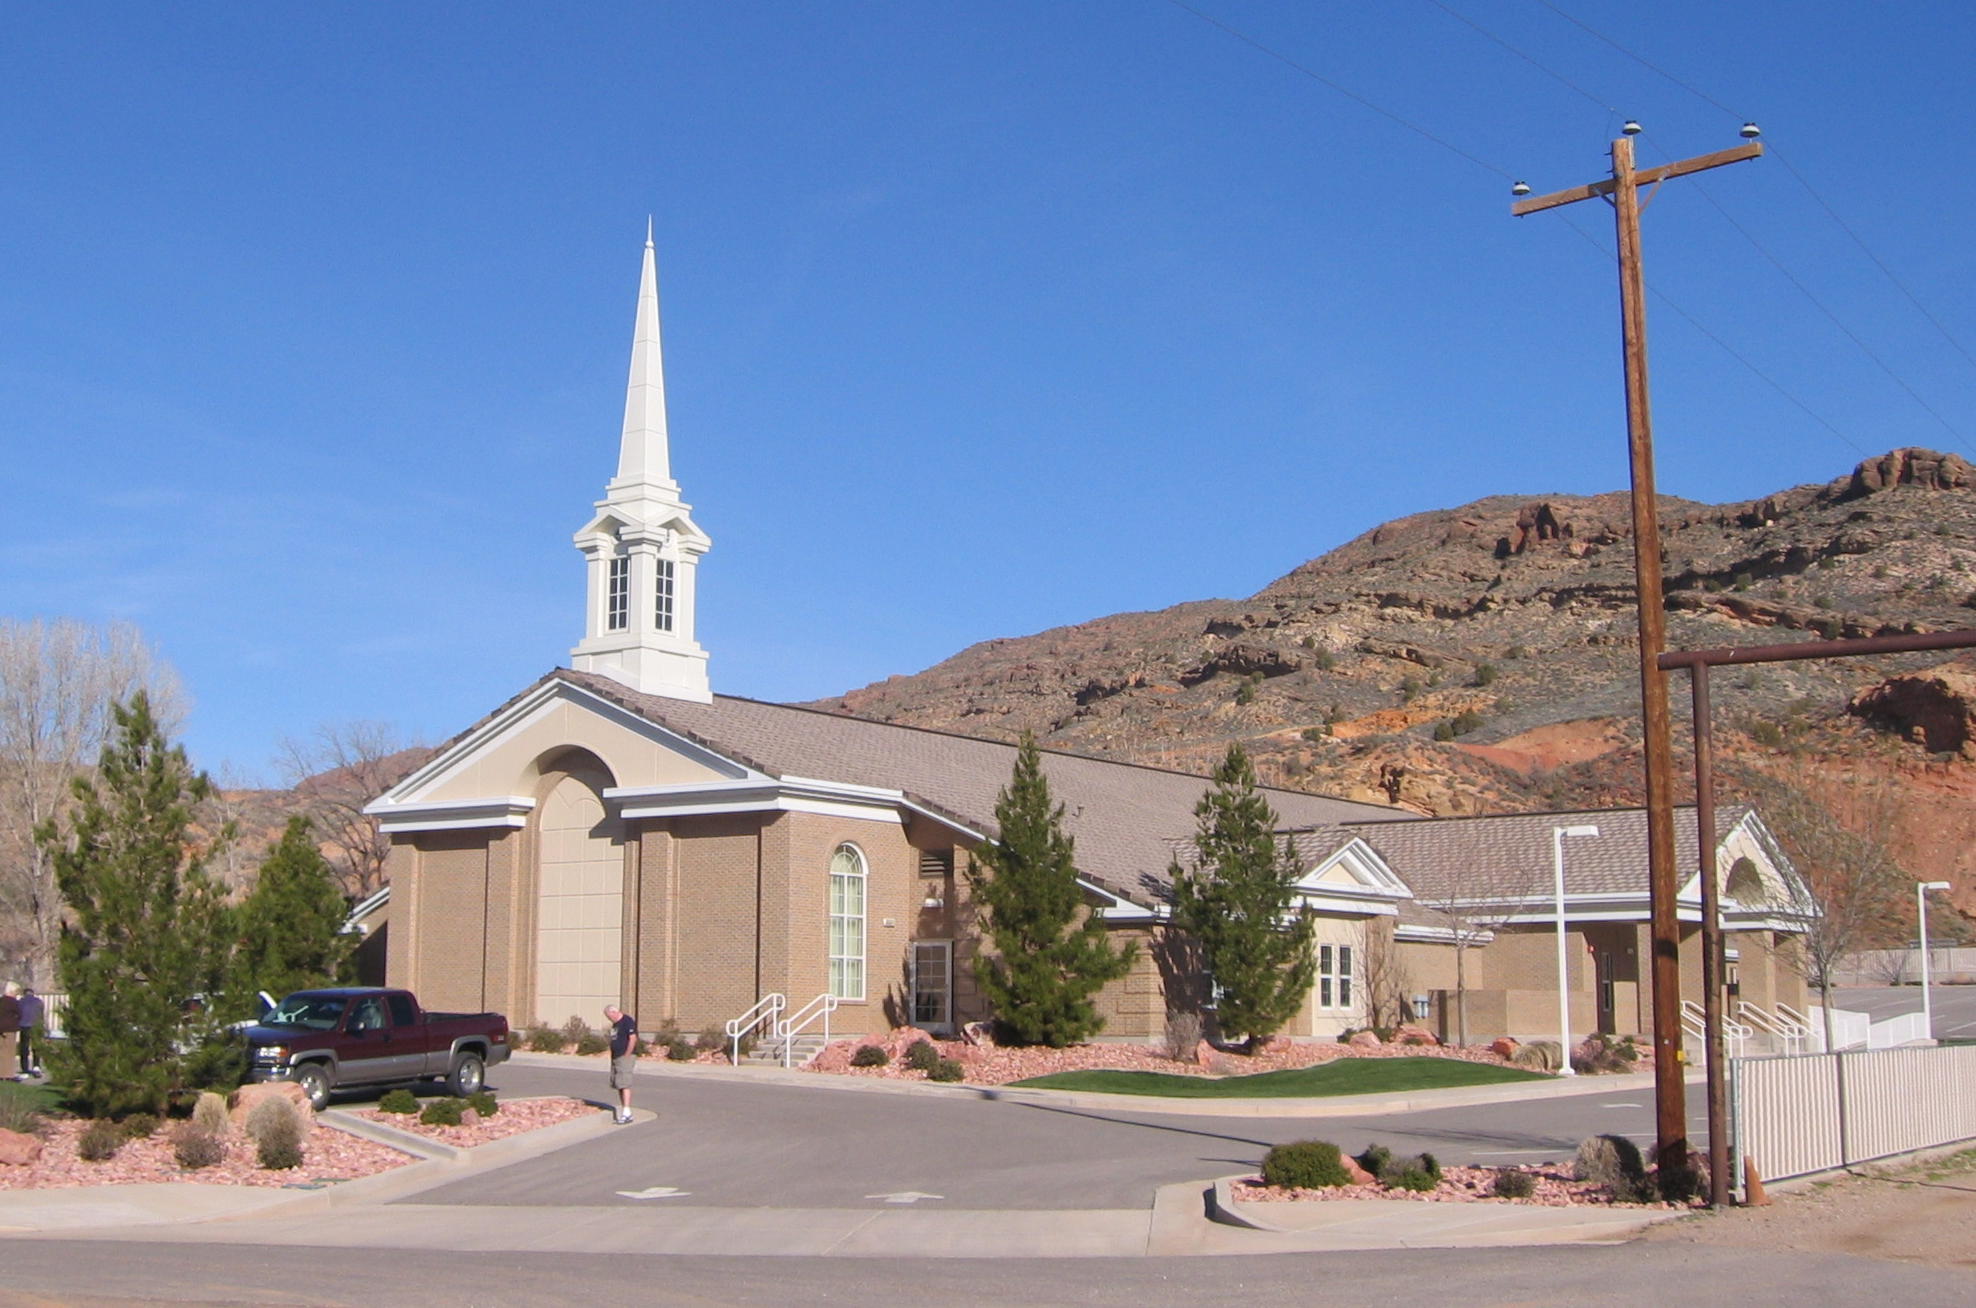 Front of the new Gunlock church building